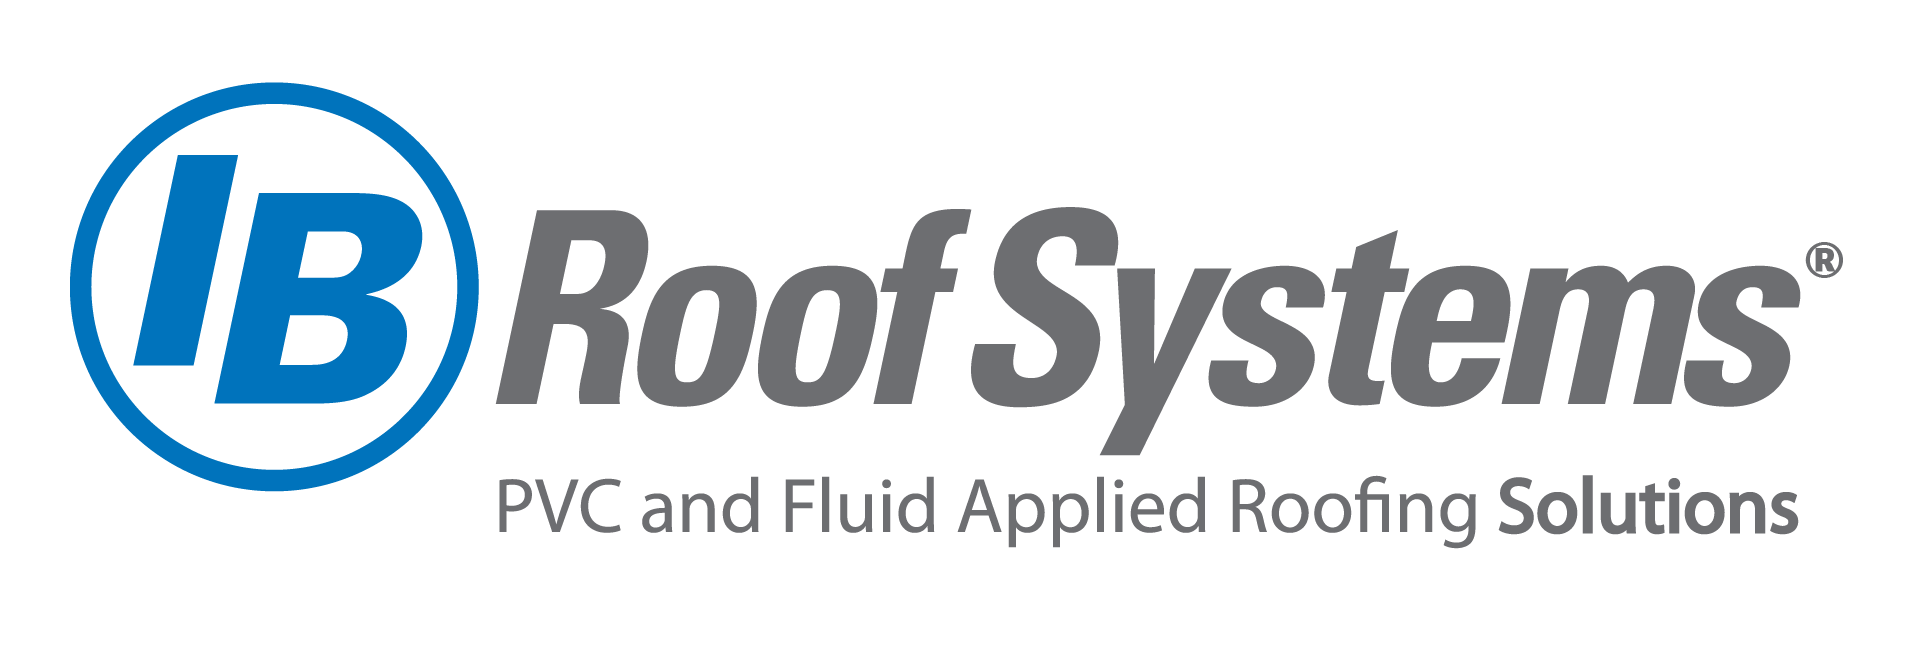 IB Roof Systems Logo